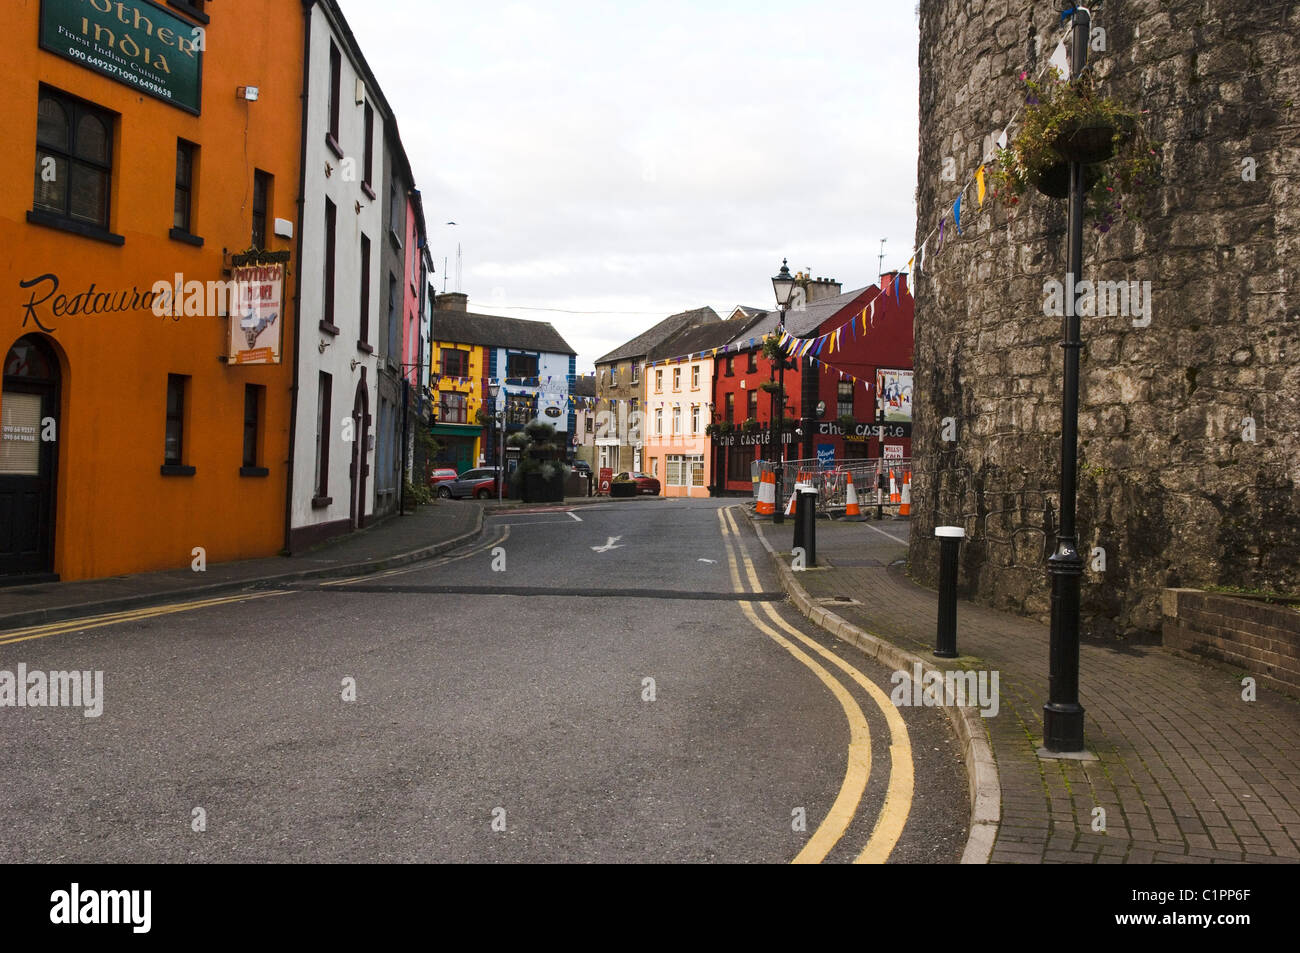 Athlone High Resolution Stock Photography and Images - Alamy